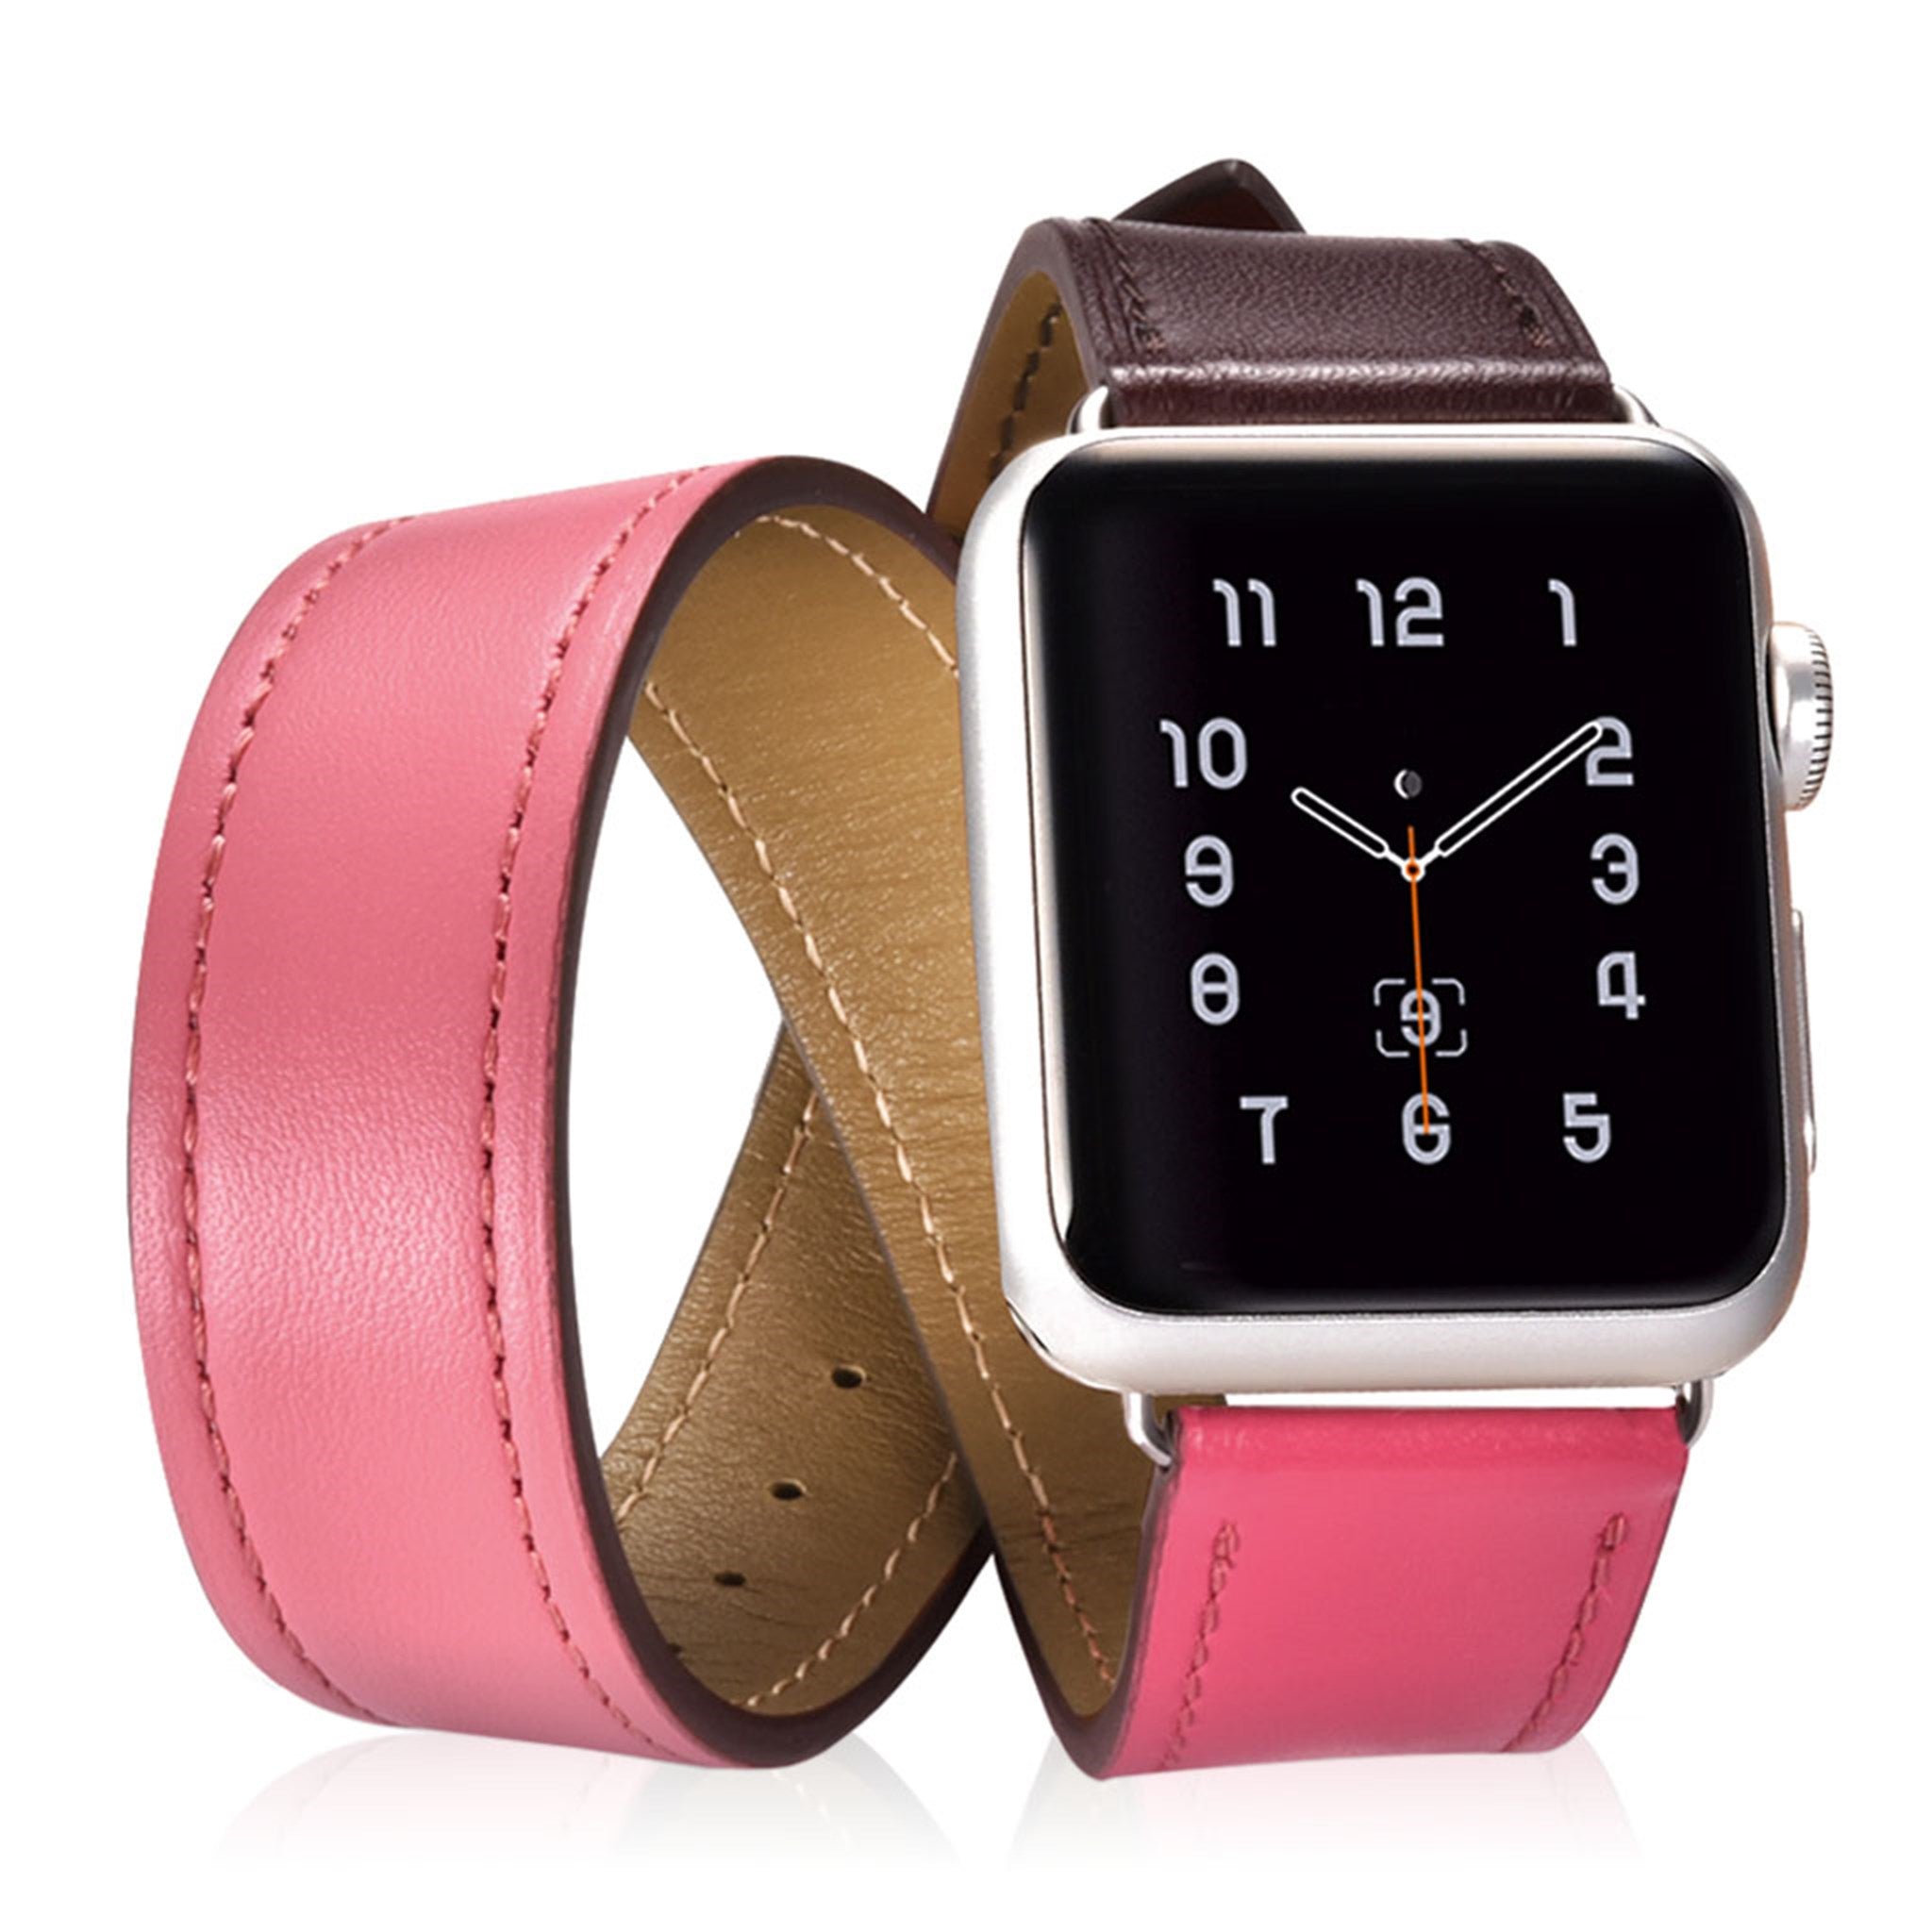 iCarer Trio-Strap Apple Watch Series 5 40mm Genuine Leather Band - Coffee+Rose+Pink